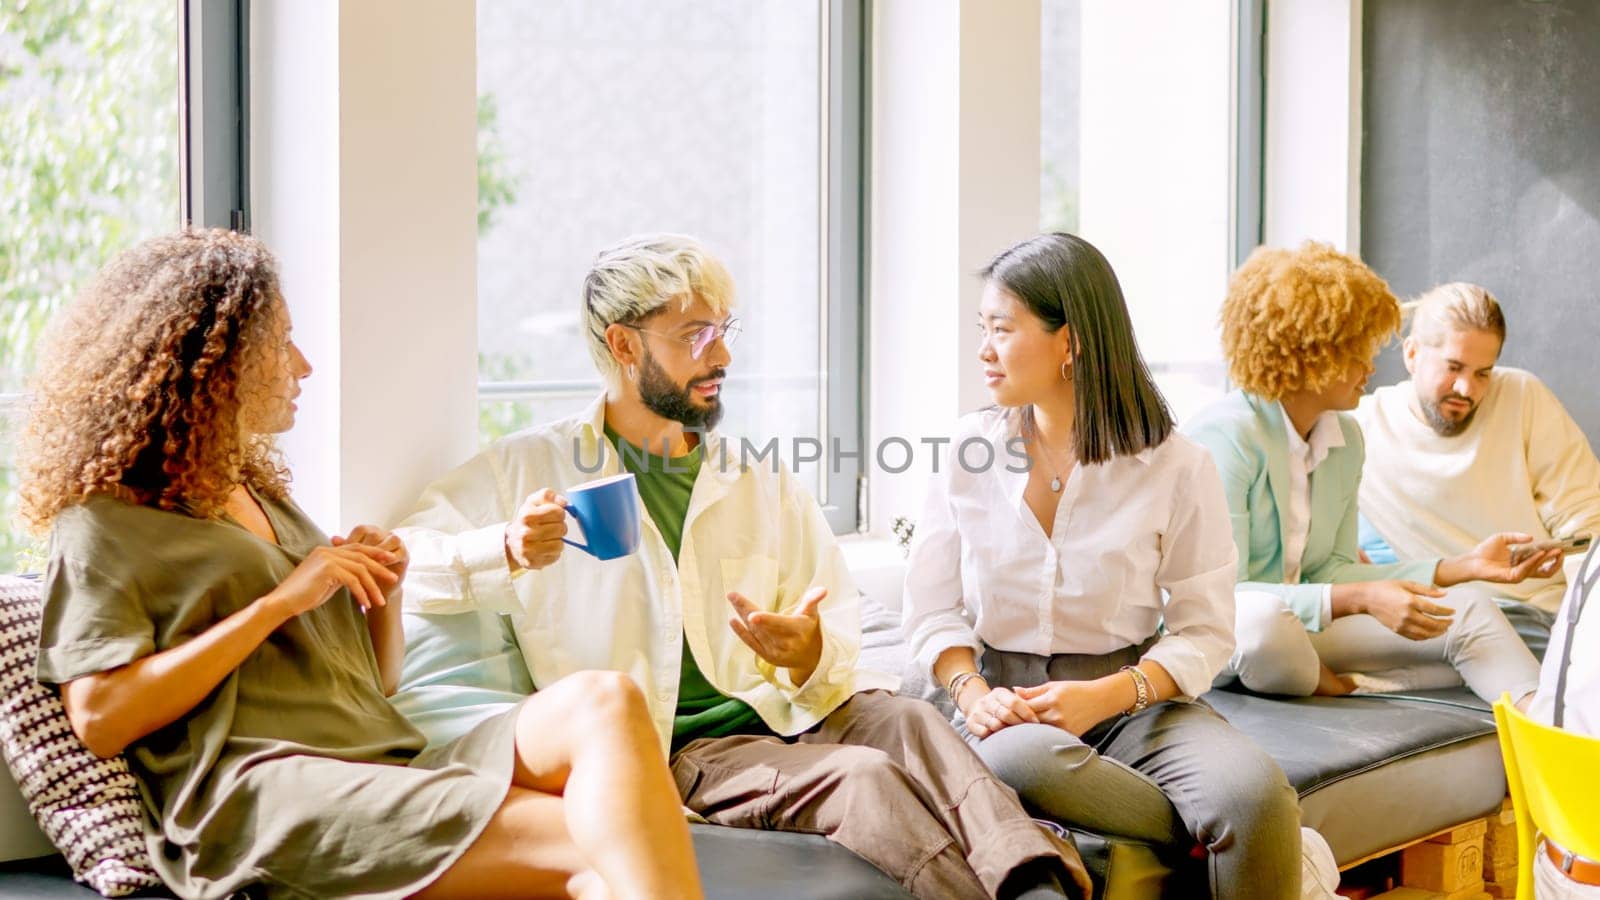 Coworkers chatting relaxed during coffee break sitting on comfortable chairs